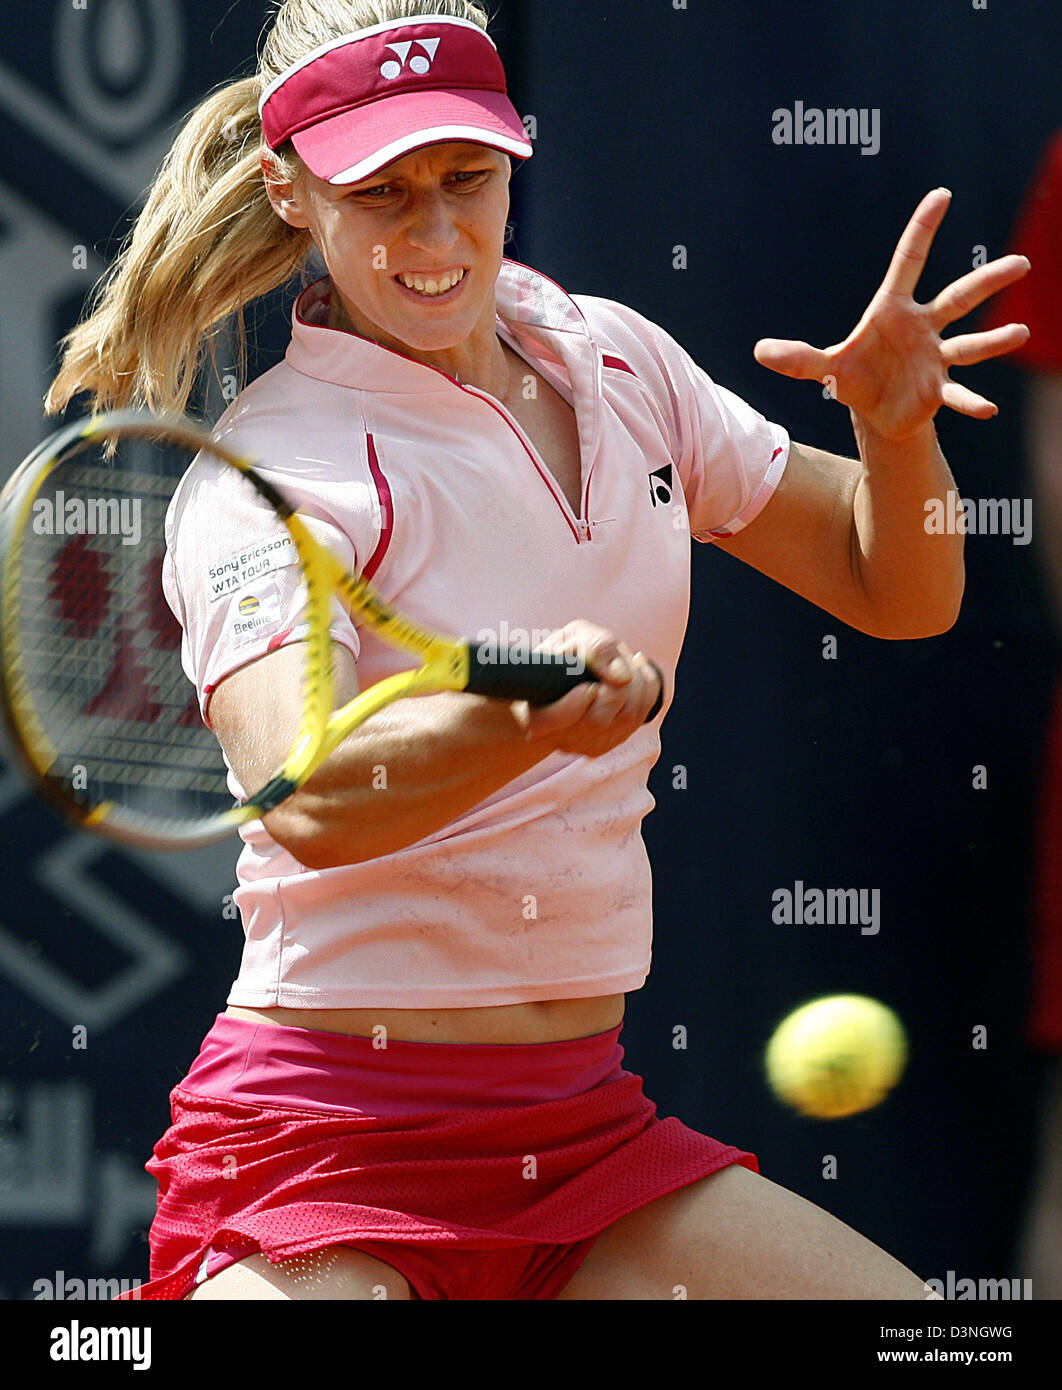 Russian tennis pro Elena Dementieva returns the ball during the match against Swiss Hingis at the German Open in Berlin, Germany, Wednesday, 10 May 2006. Dementieva lost the match 3-6 and 2-6. Photo: Wolfgang Kumm Stock Photo